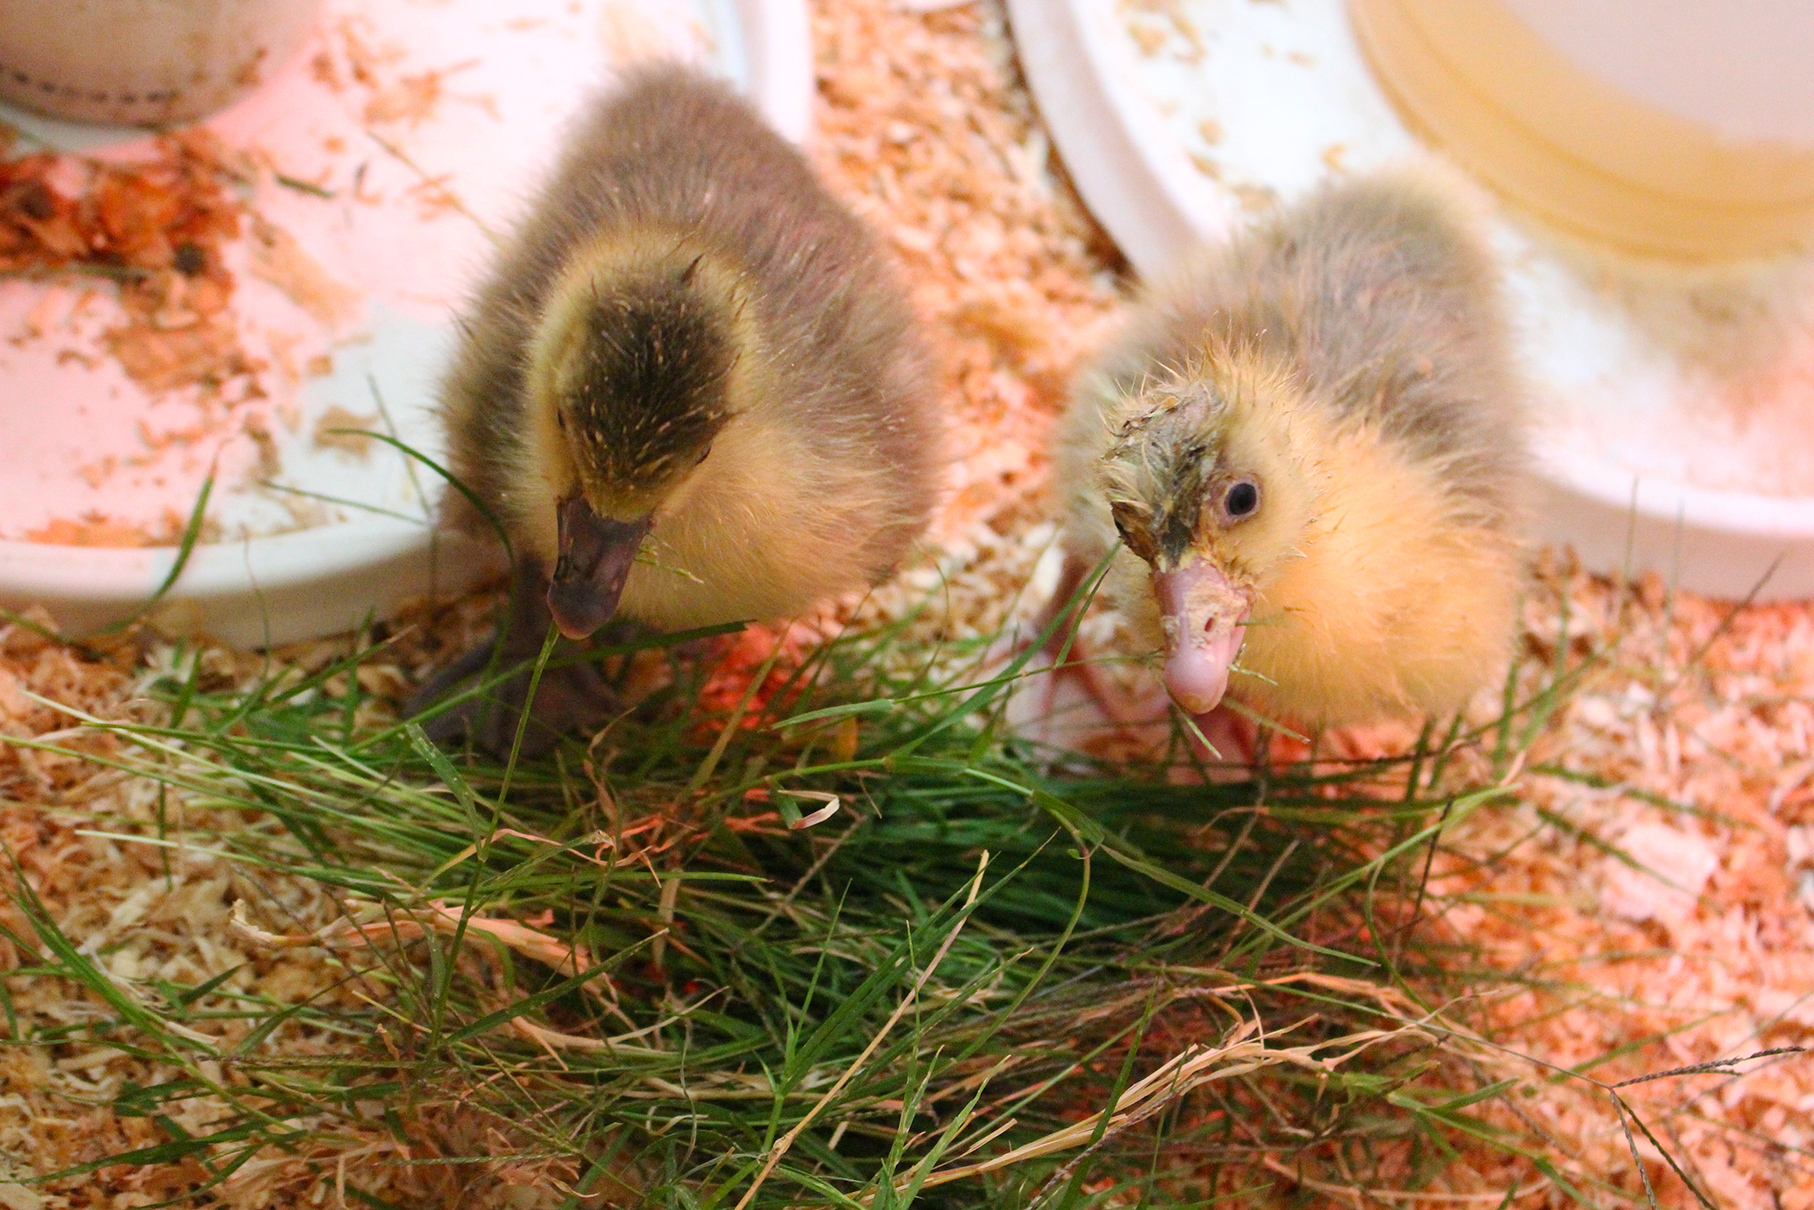 Here are 5 tips to take raising geese to the next level. These are simple tips you can apply to set your goslings on a path to a long, vigorous healthy life. Homesteading beyond the basics!